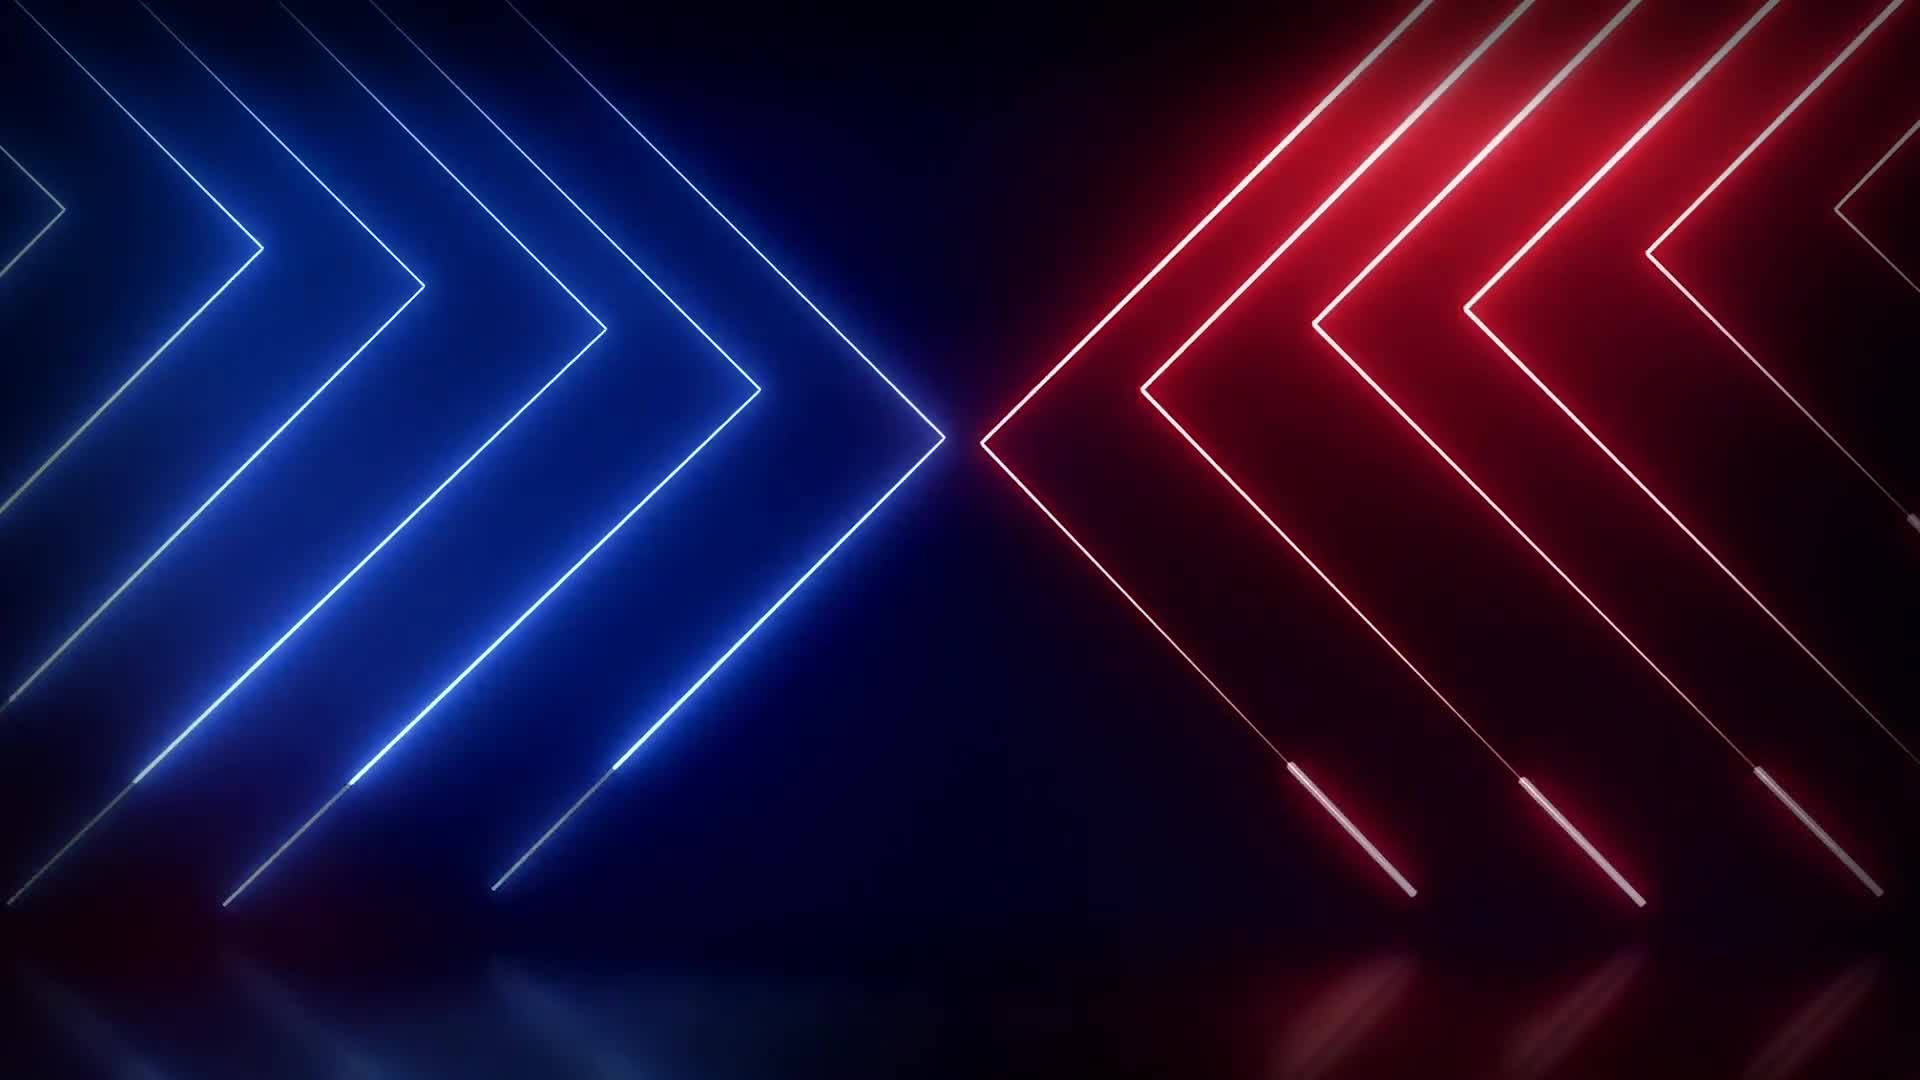 Vibrant Red and Blue Neon Triangle Lights. Wallpaper